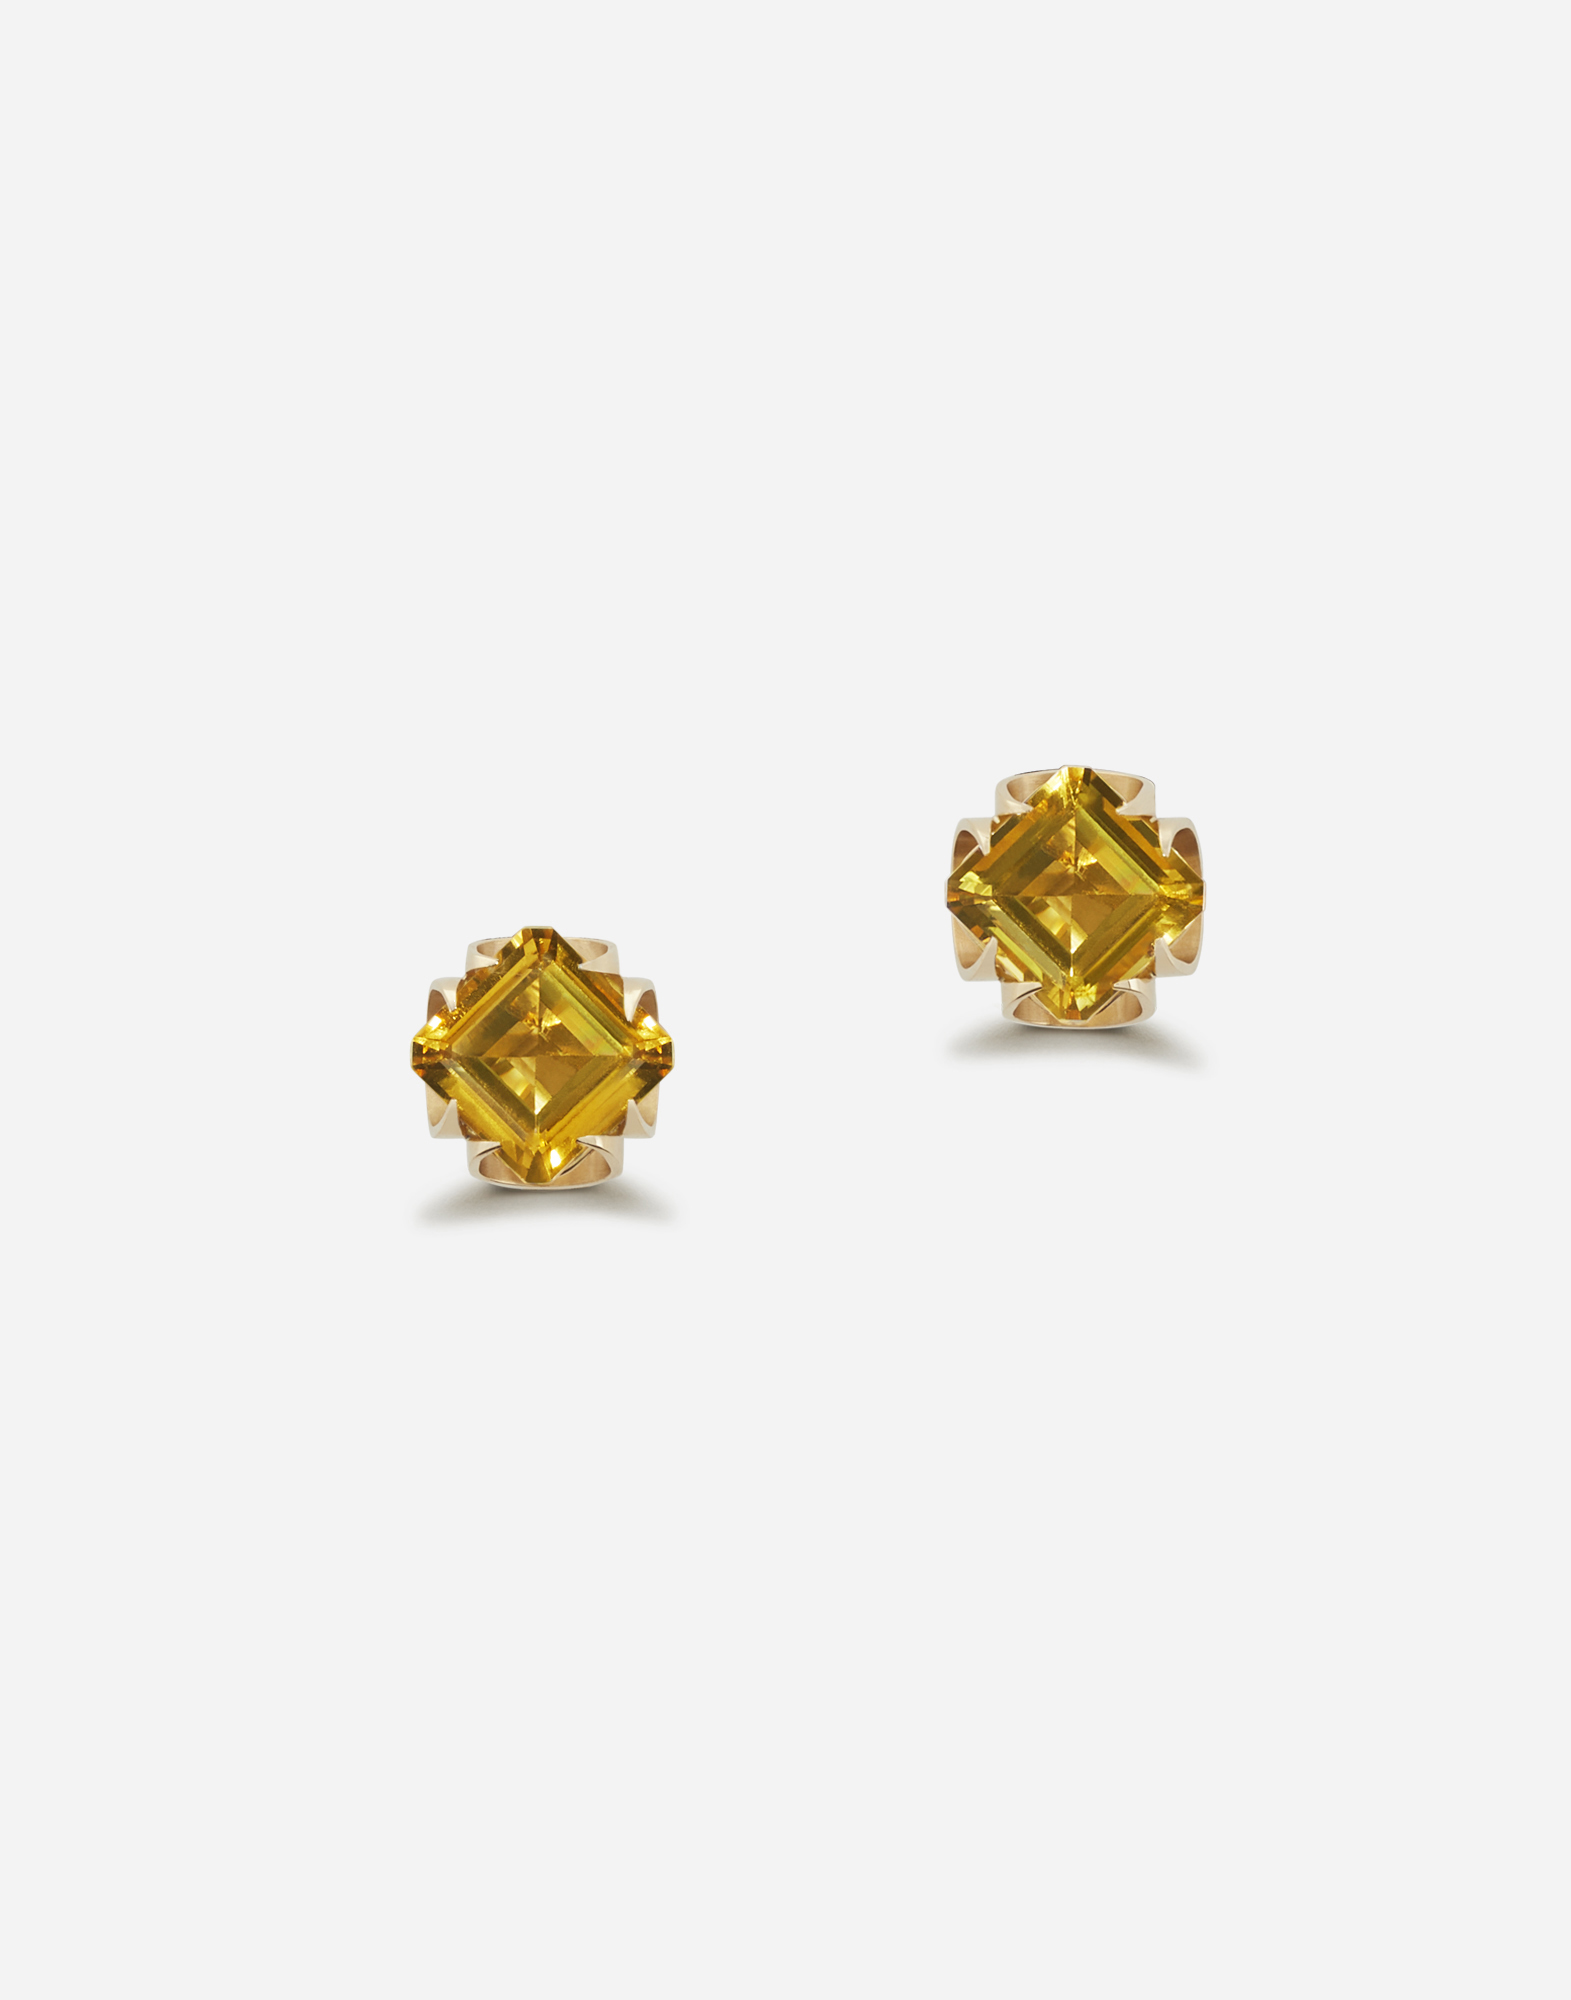 Anna earrings in yellow gold with citrine quartzes in Gold